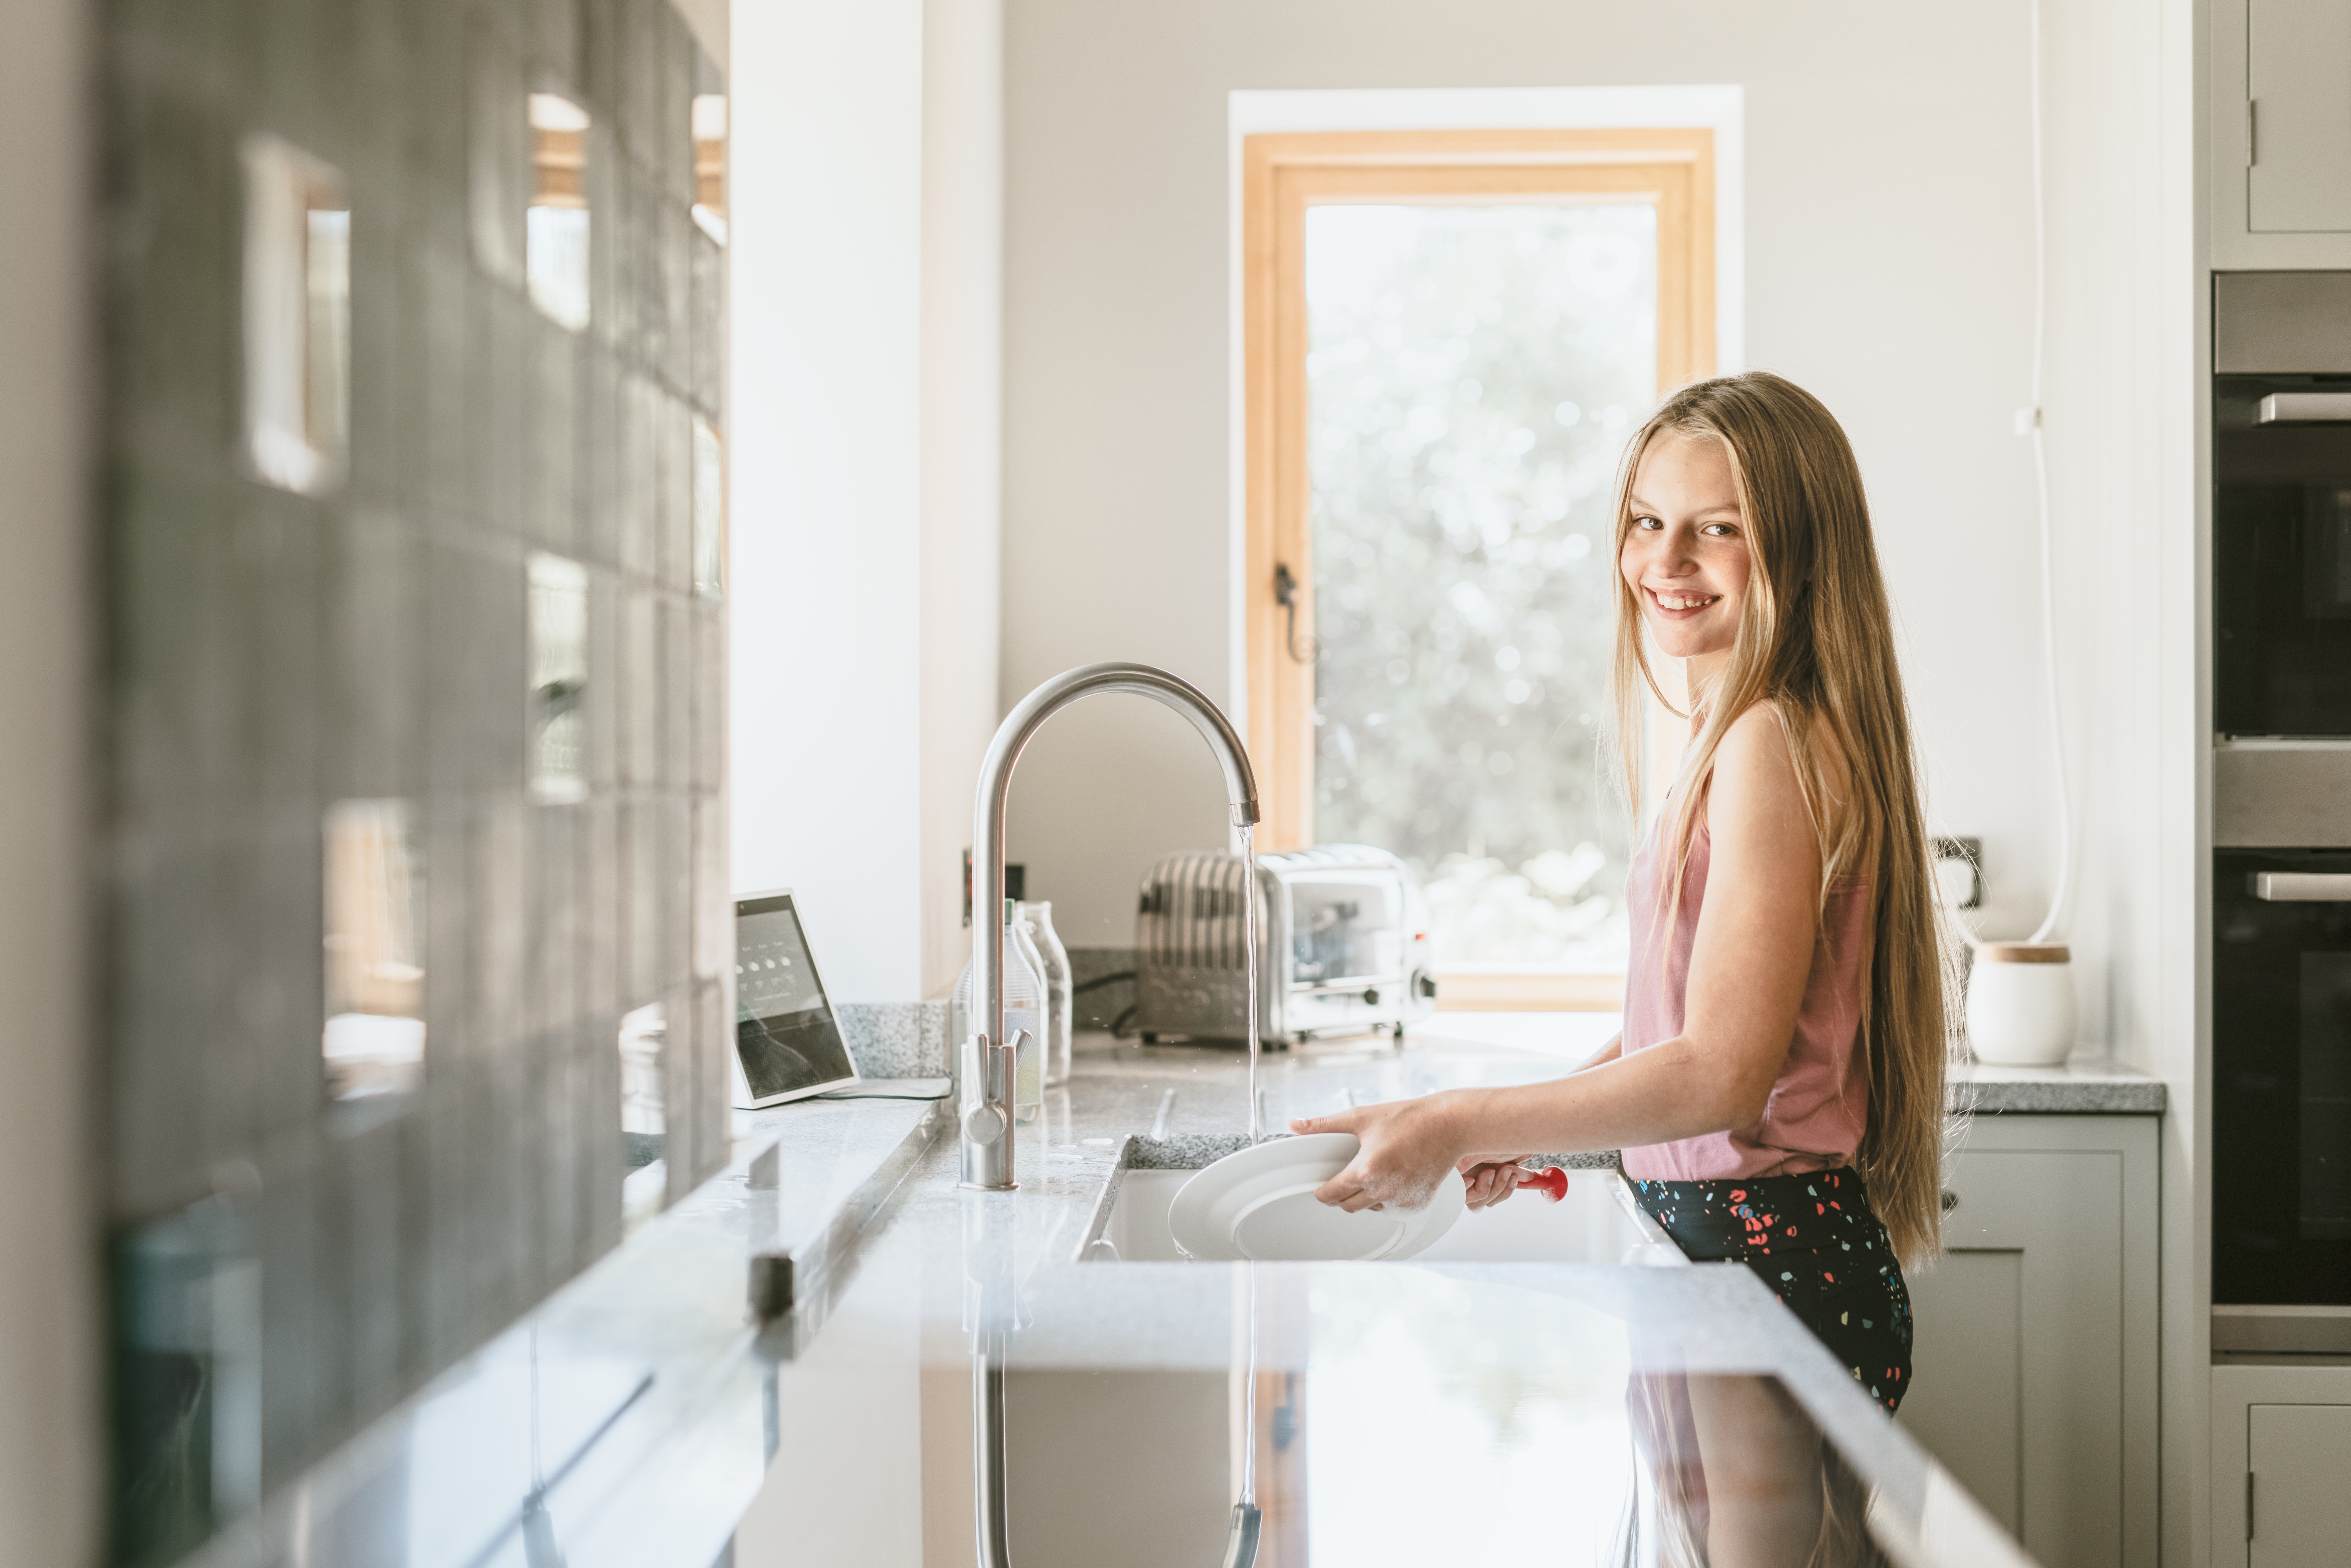 Girl wash the dishes | Shutterstock